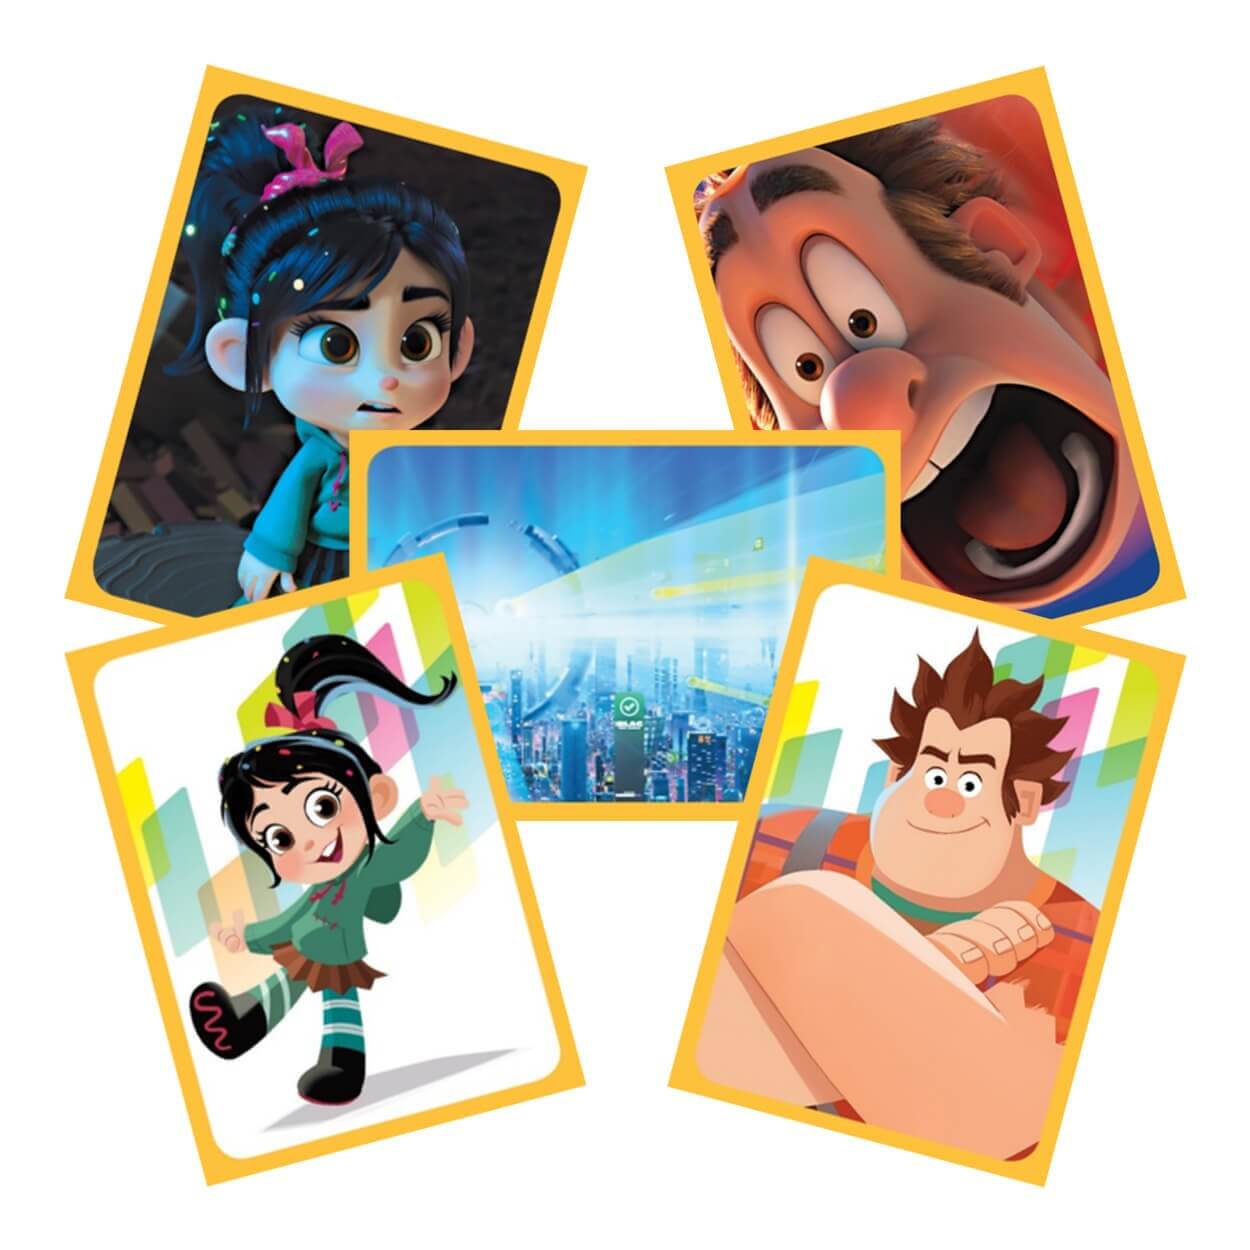 Panini Ralph Breaks The Internet Sticker Collection Product: 50 Packs Sticker Collection Earthlets